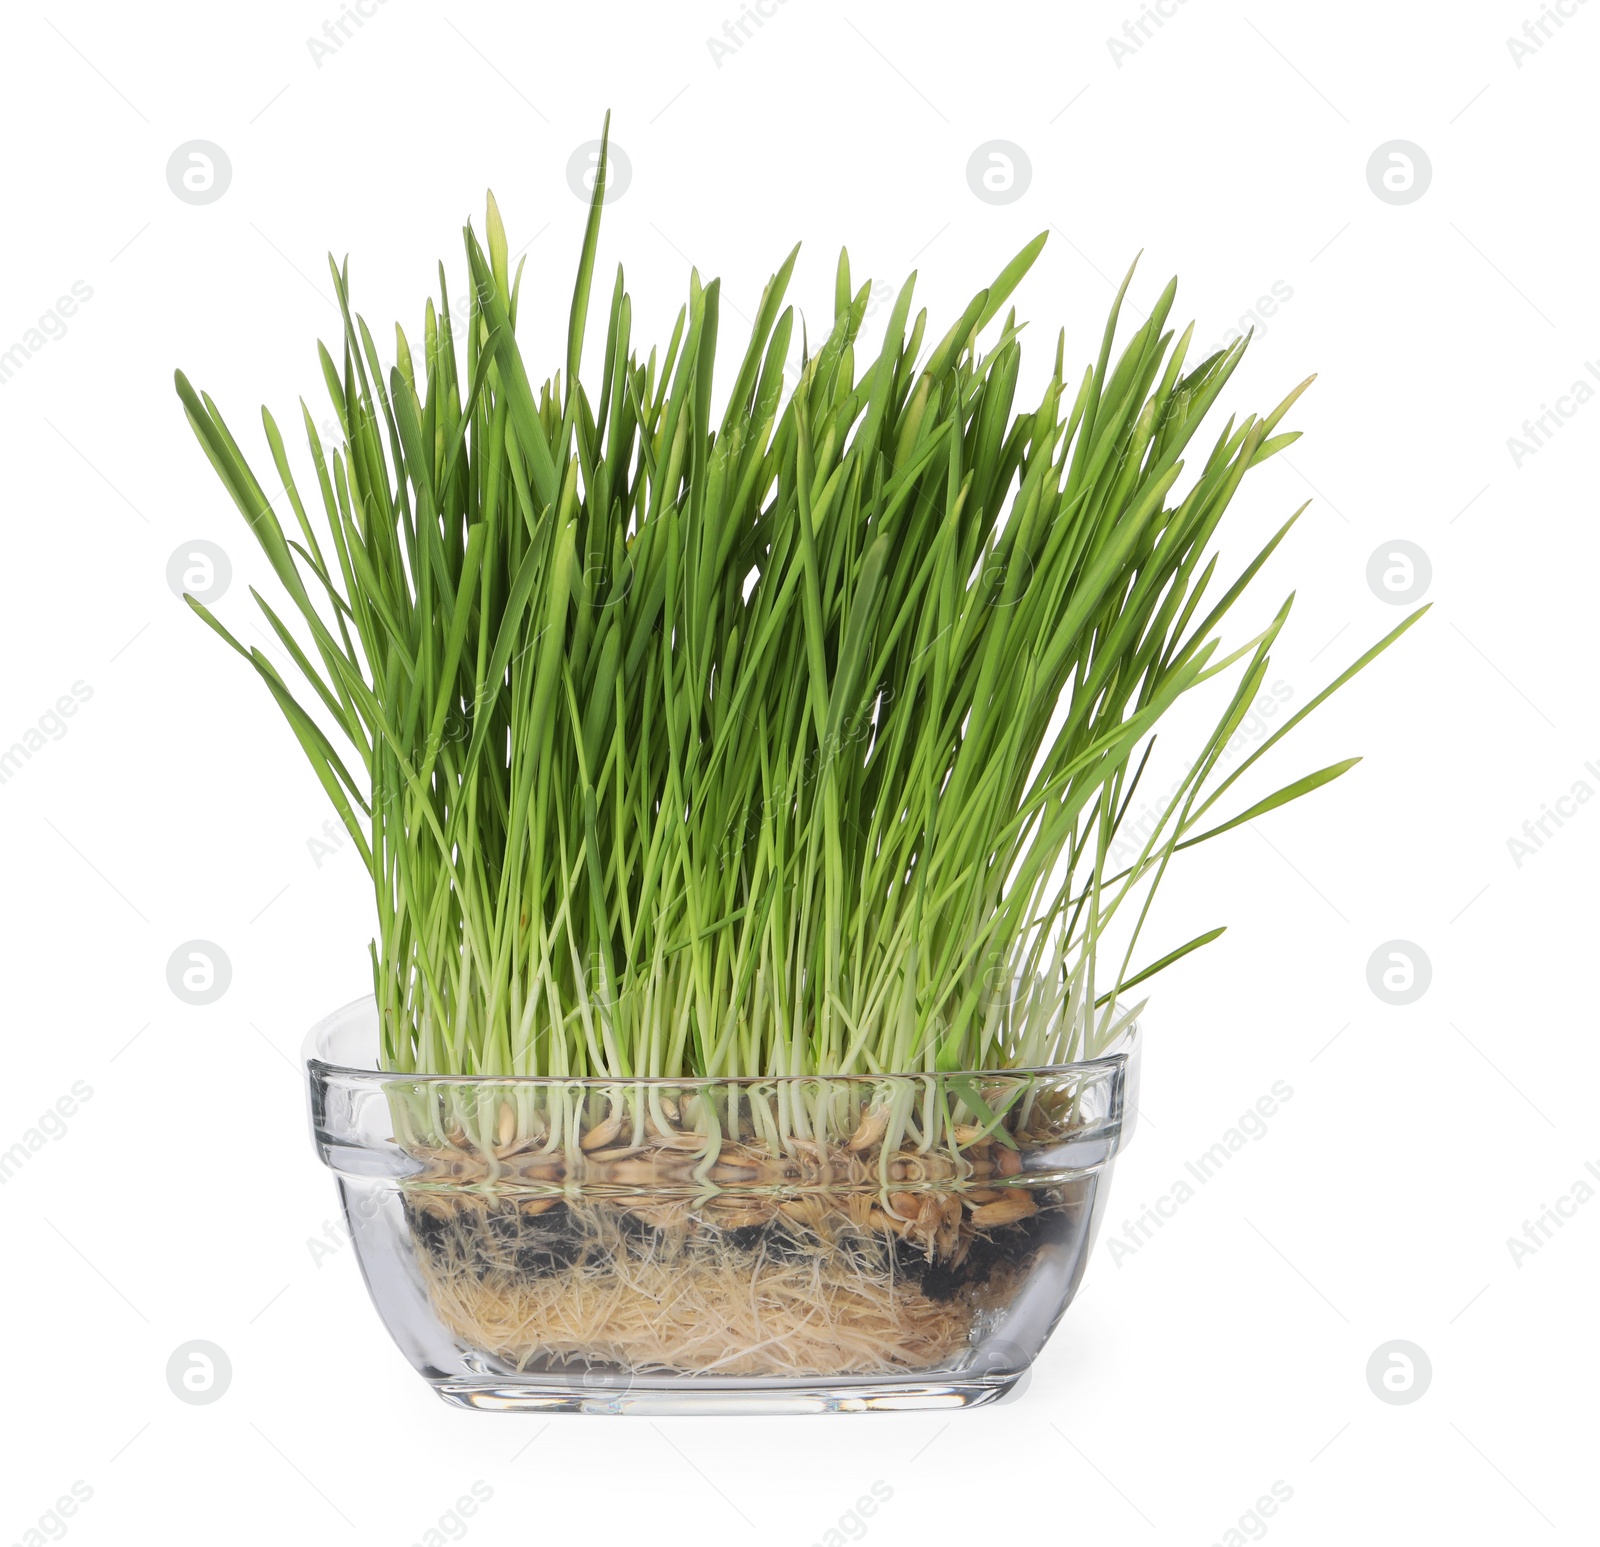 Photo of Potted fresh wheat grass isolated on white